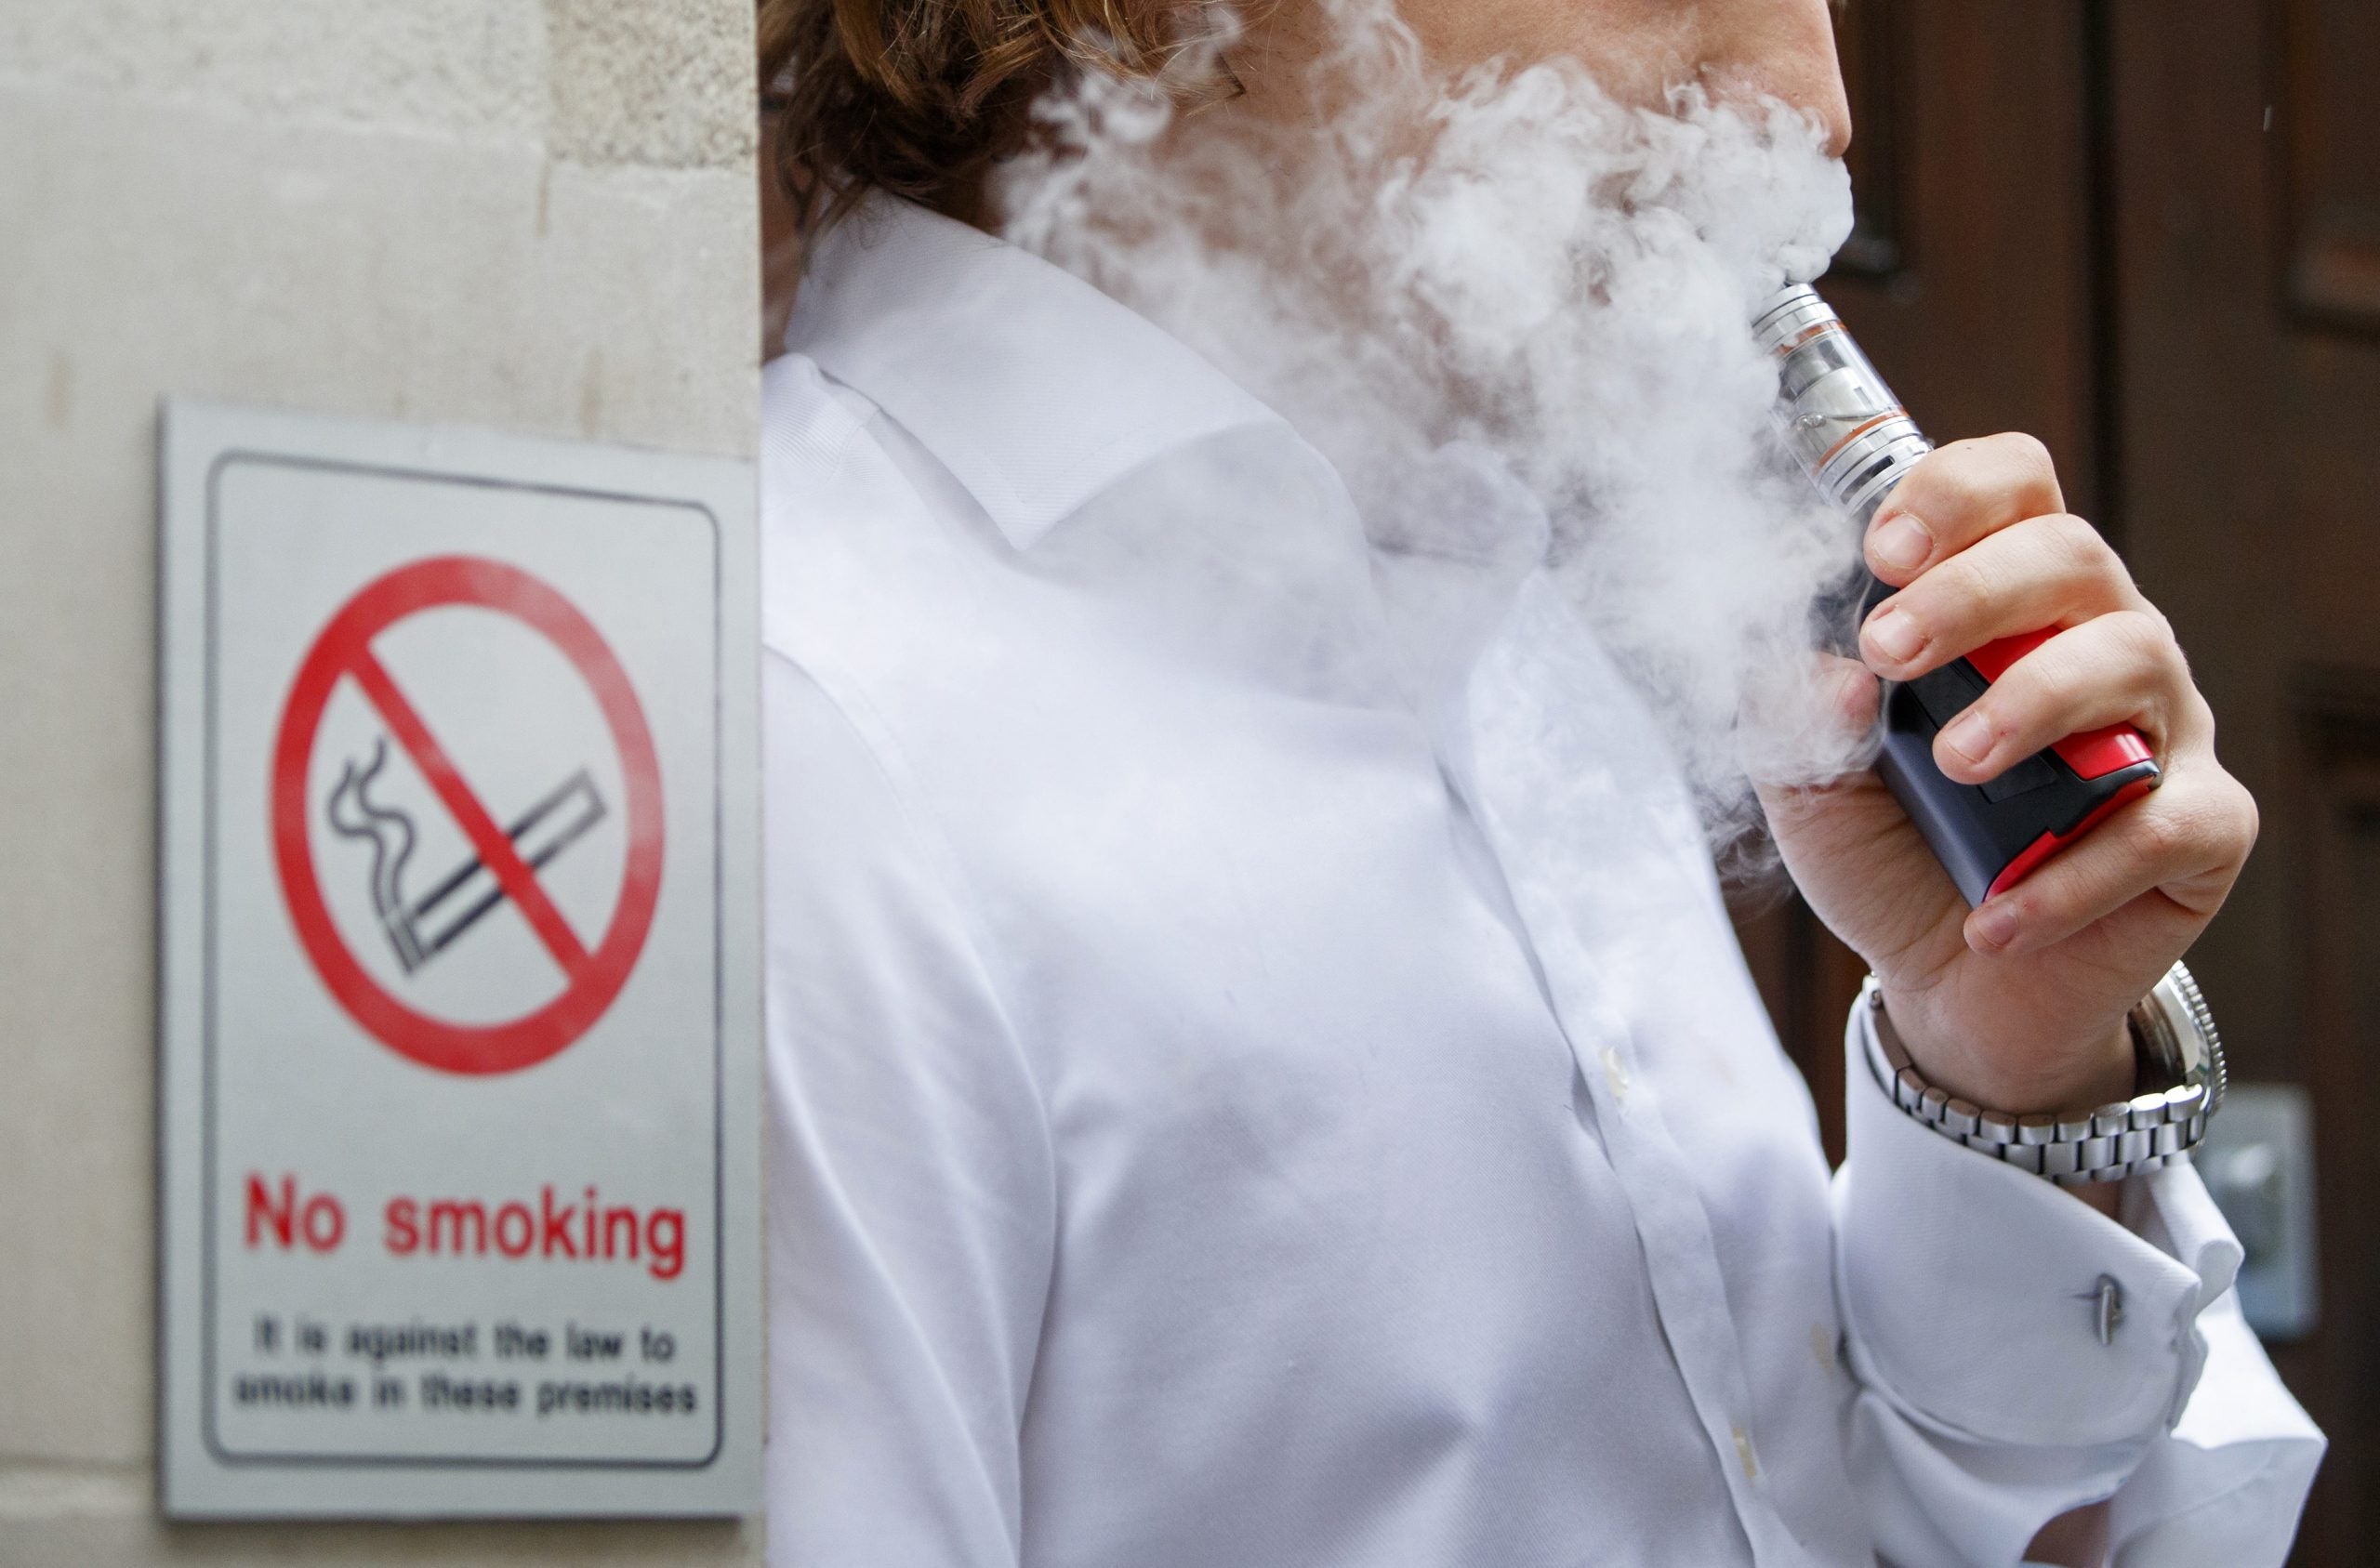 Vaping may be less harmful than smoking, but what are the long-term health risks?